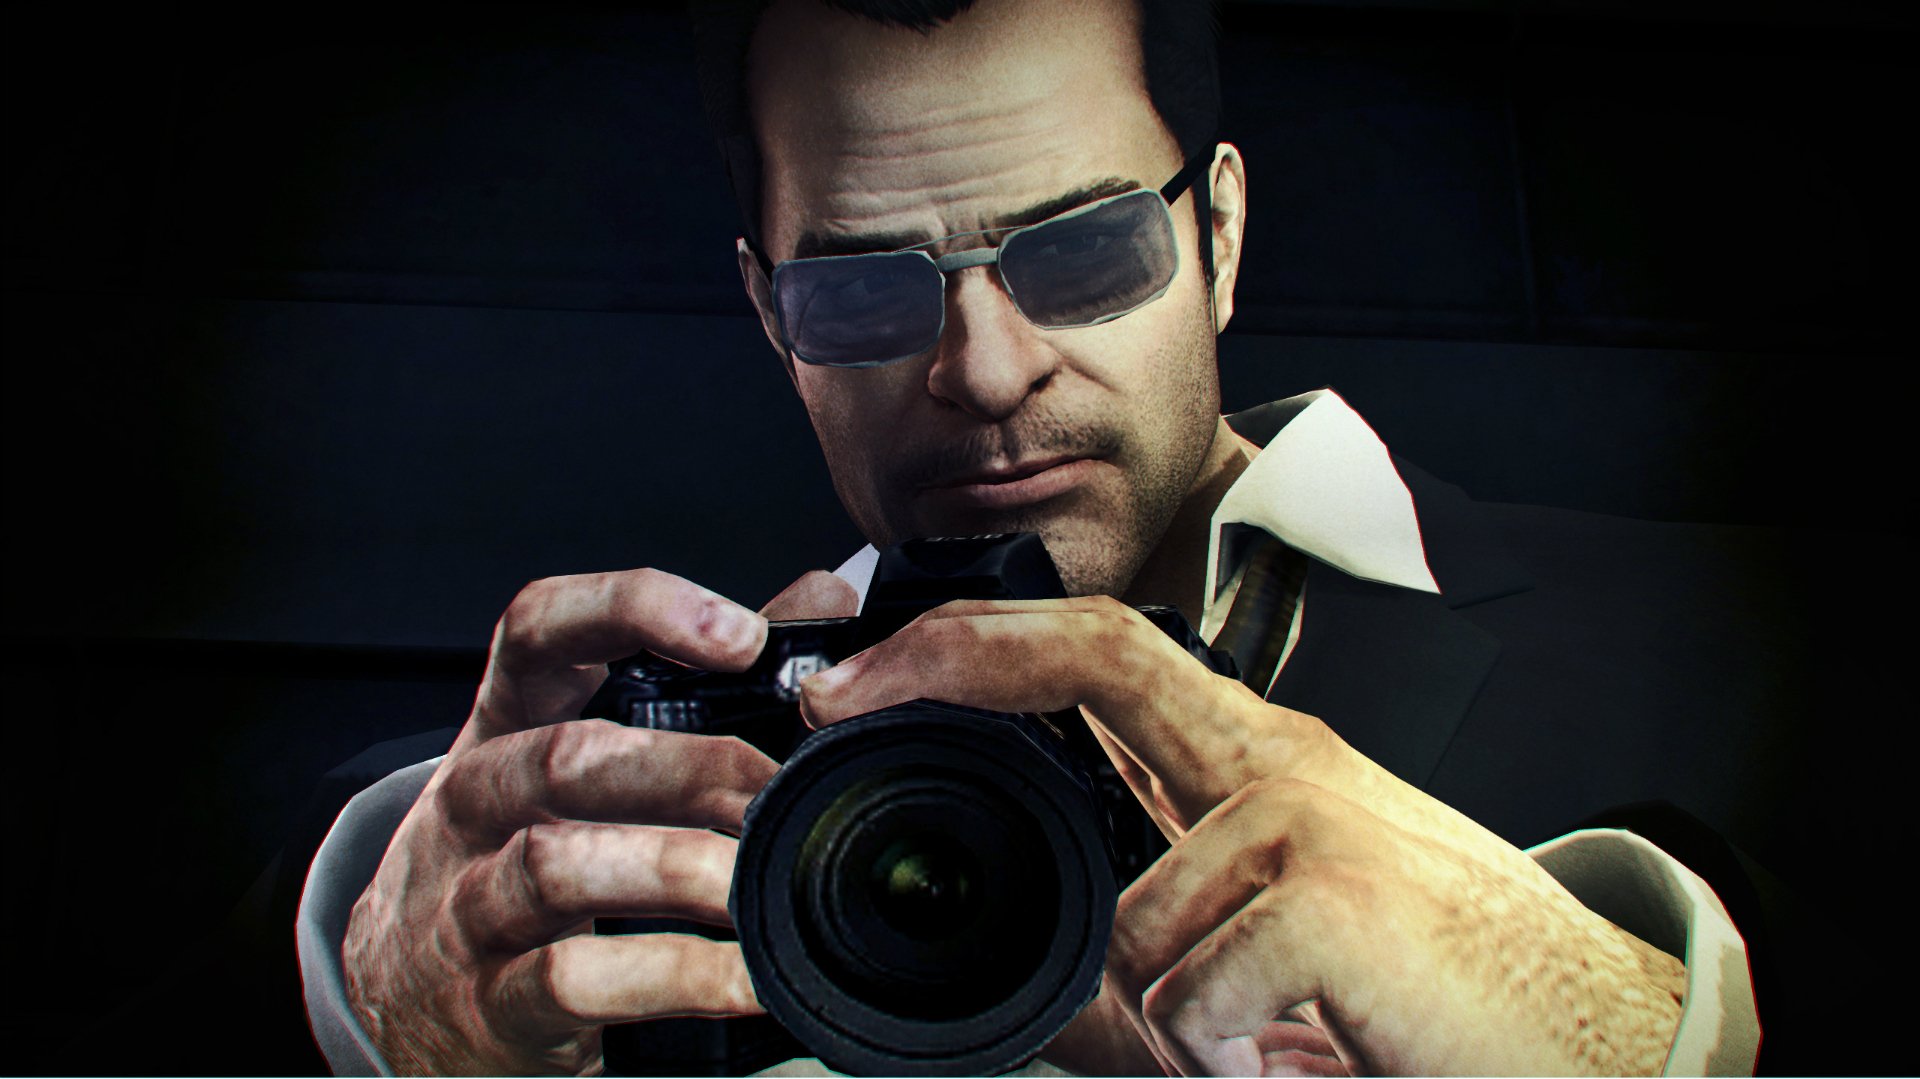 Dead Rising 2: Off the Record PC Review